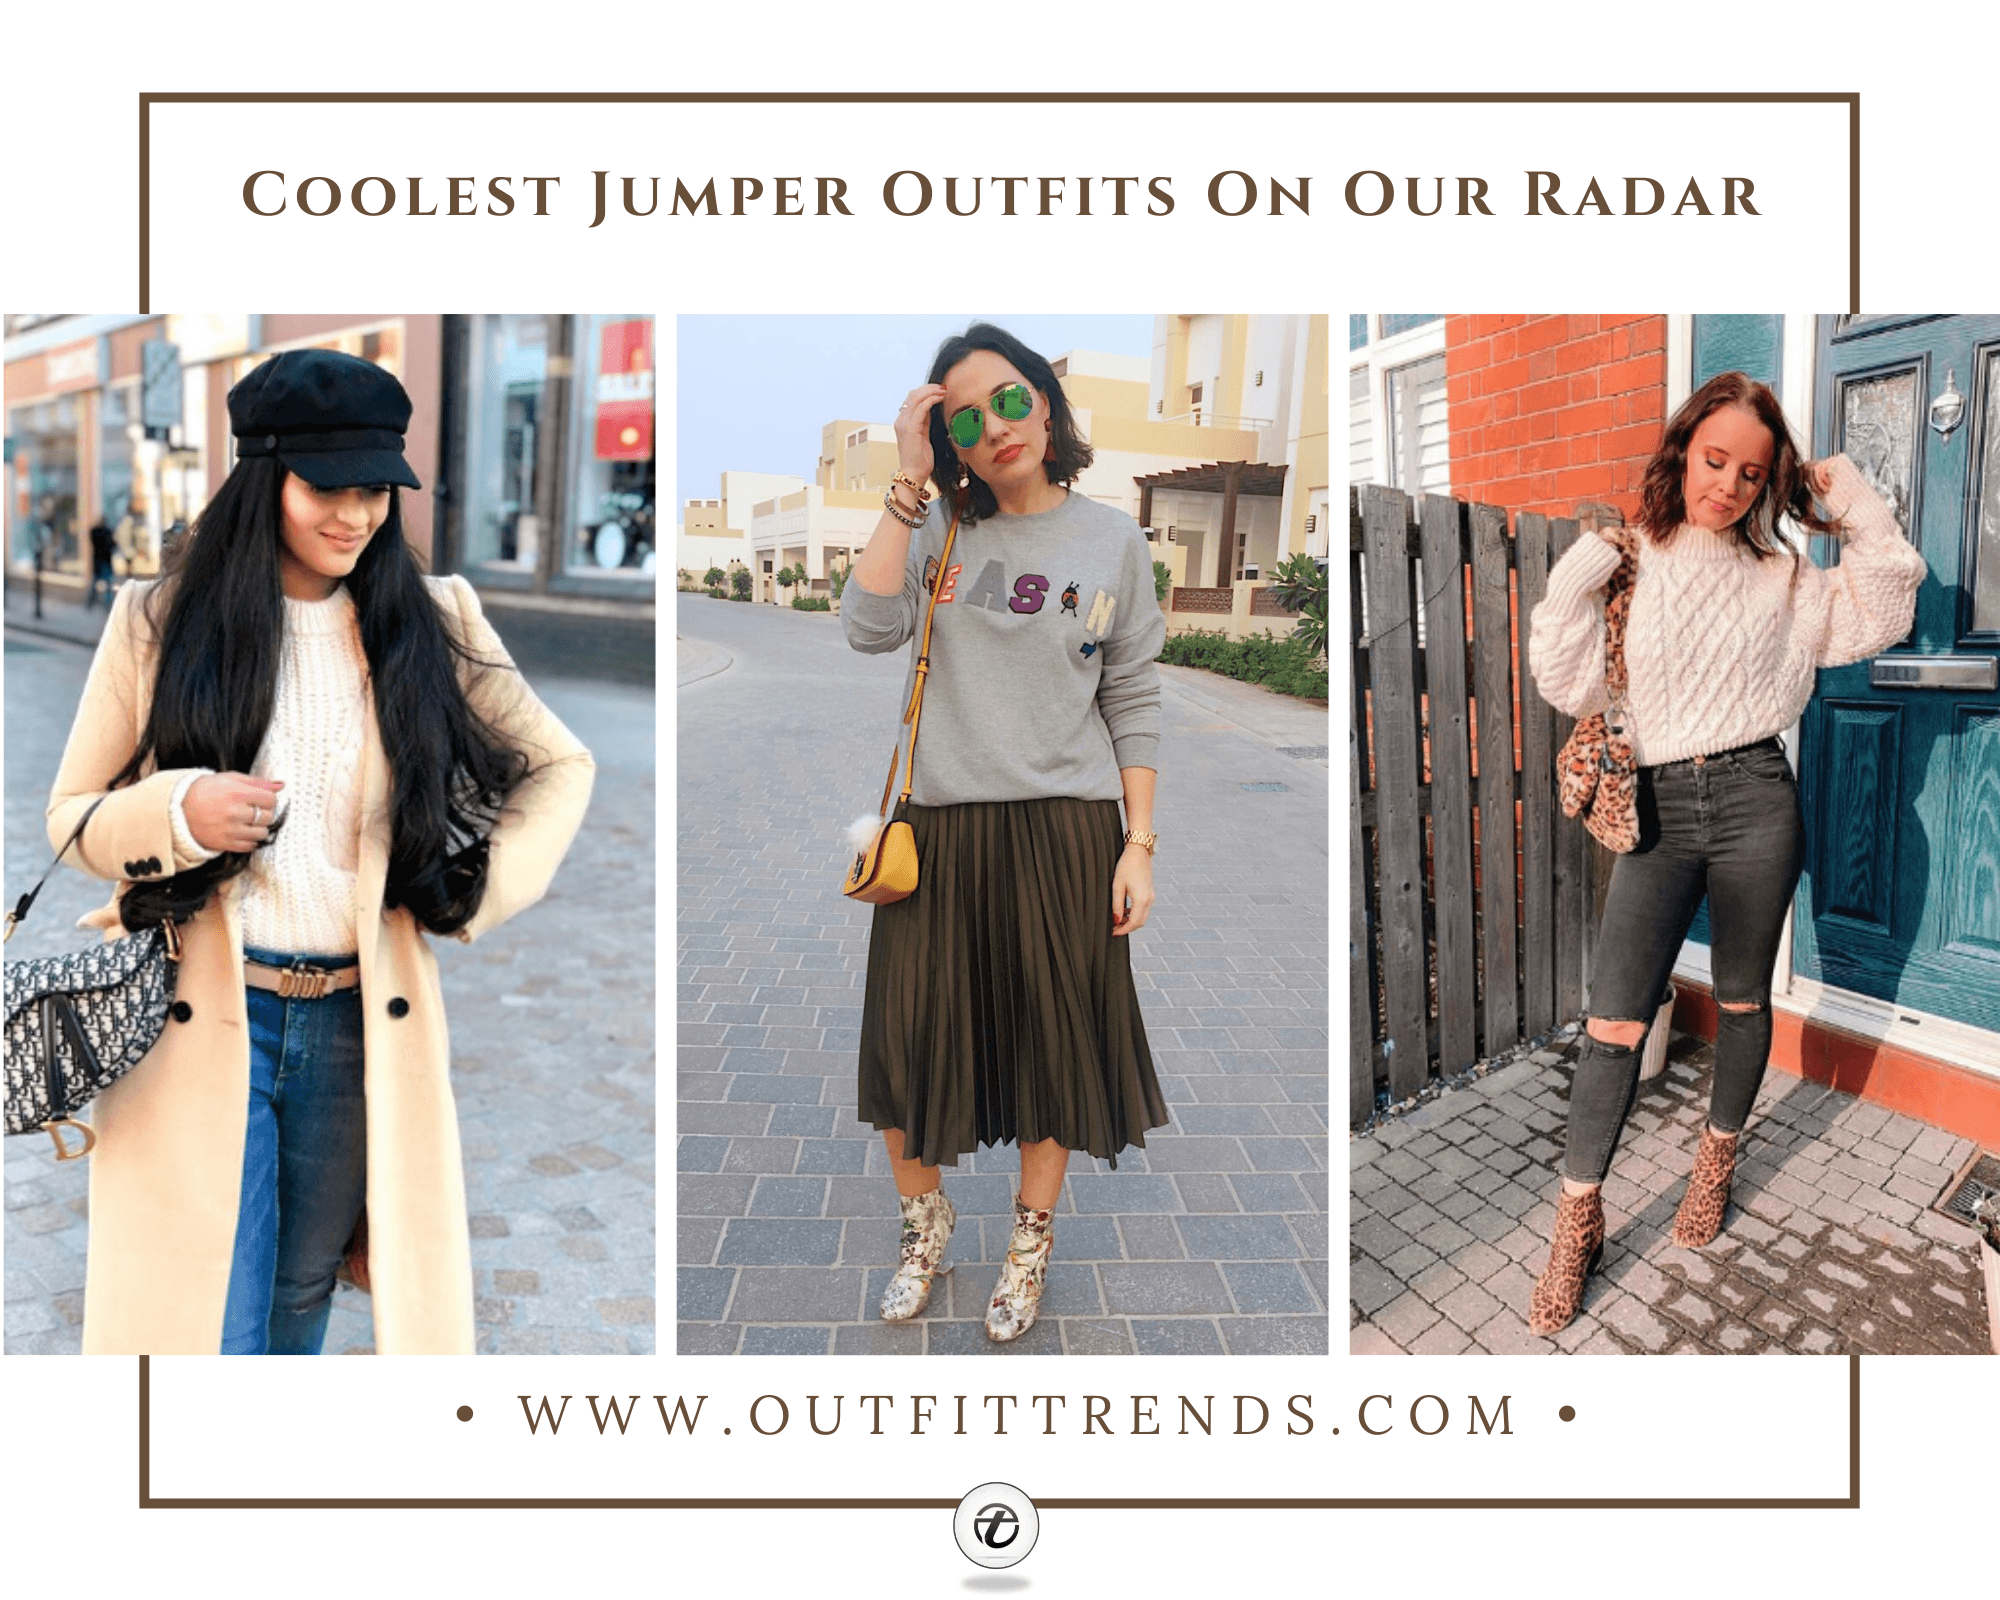 25 Trending Jumpers Outfits For Women To Copy in 2021